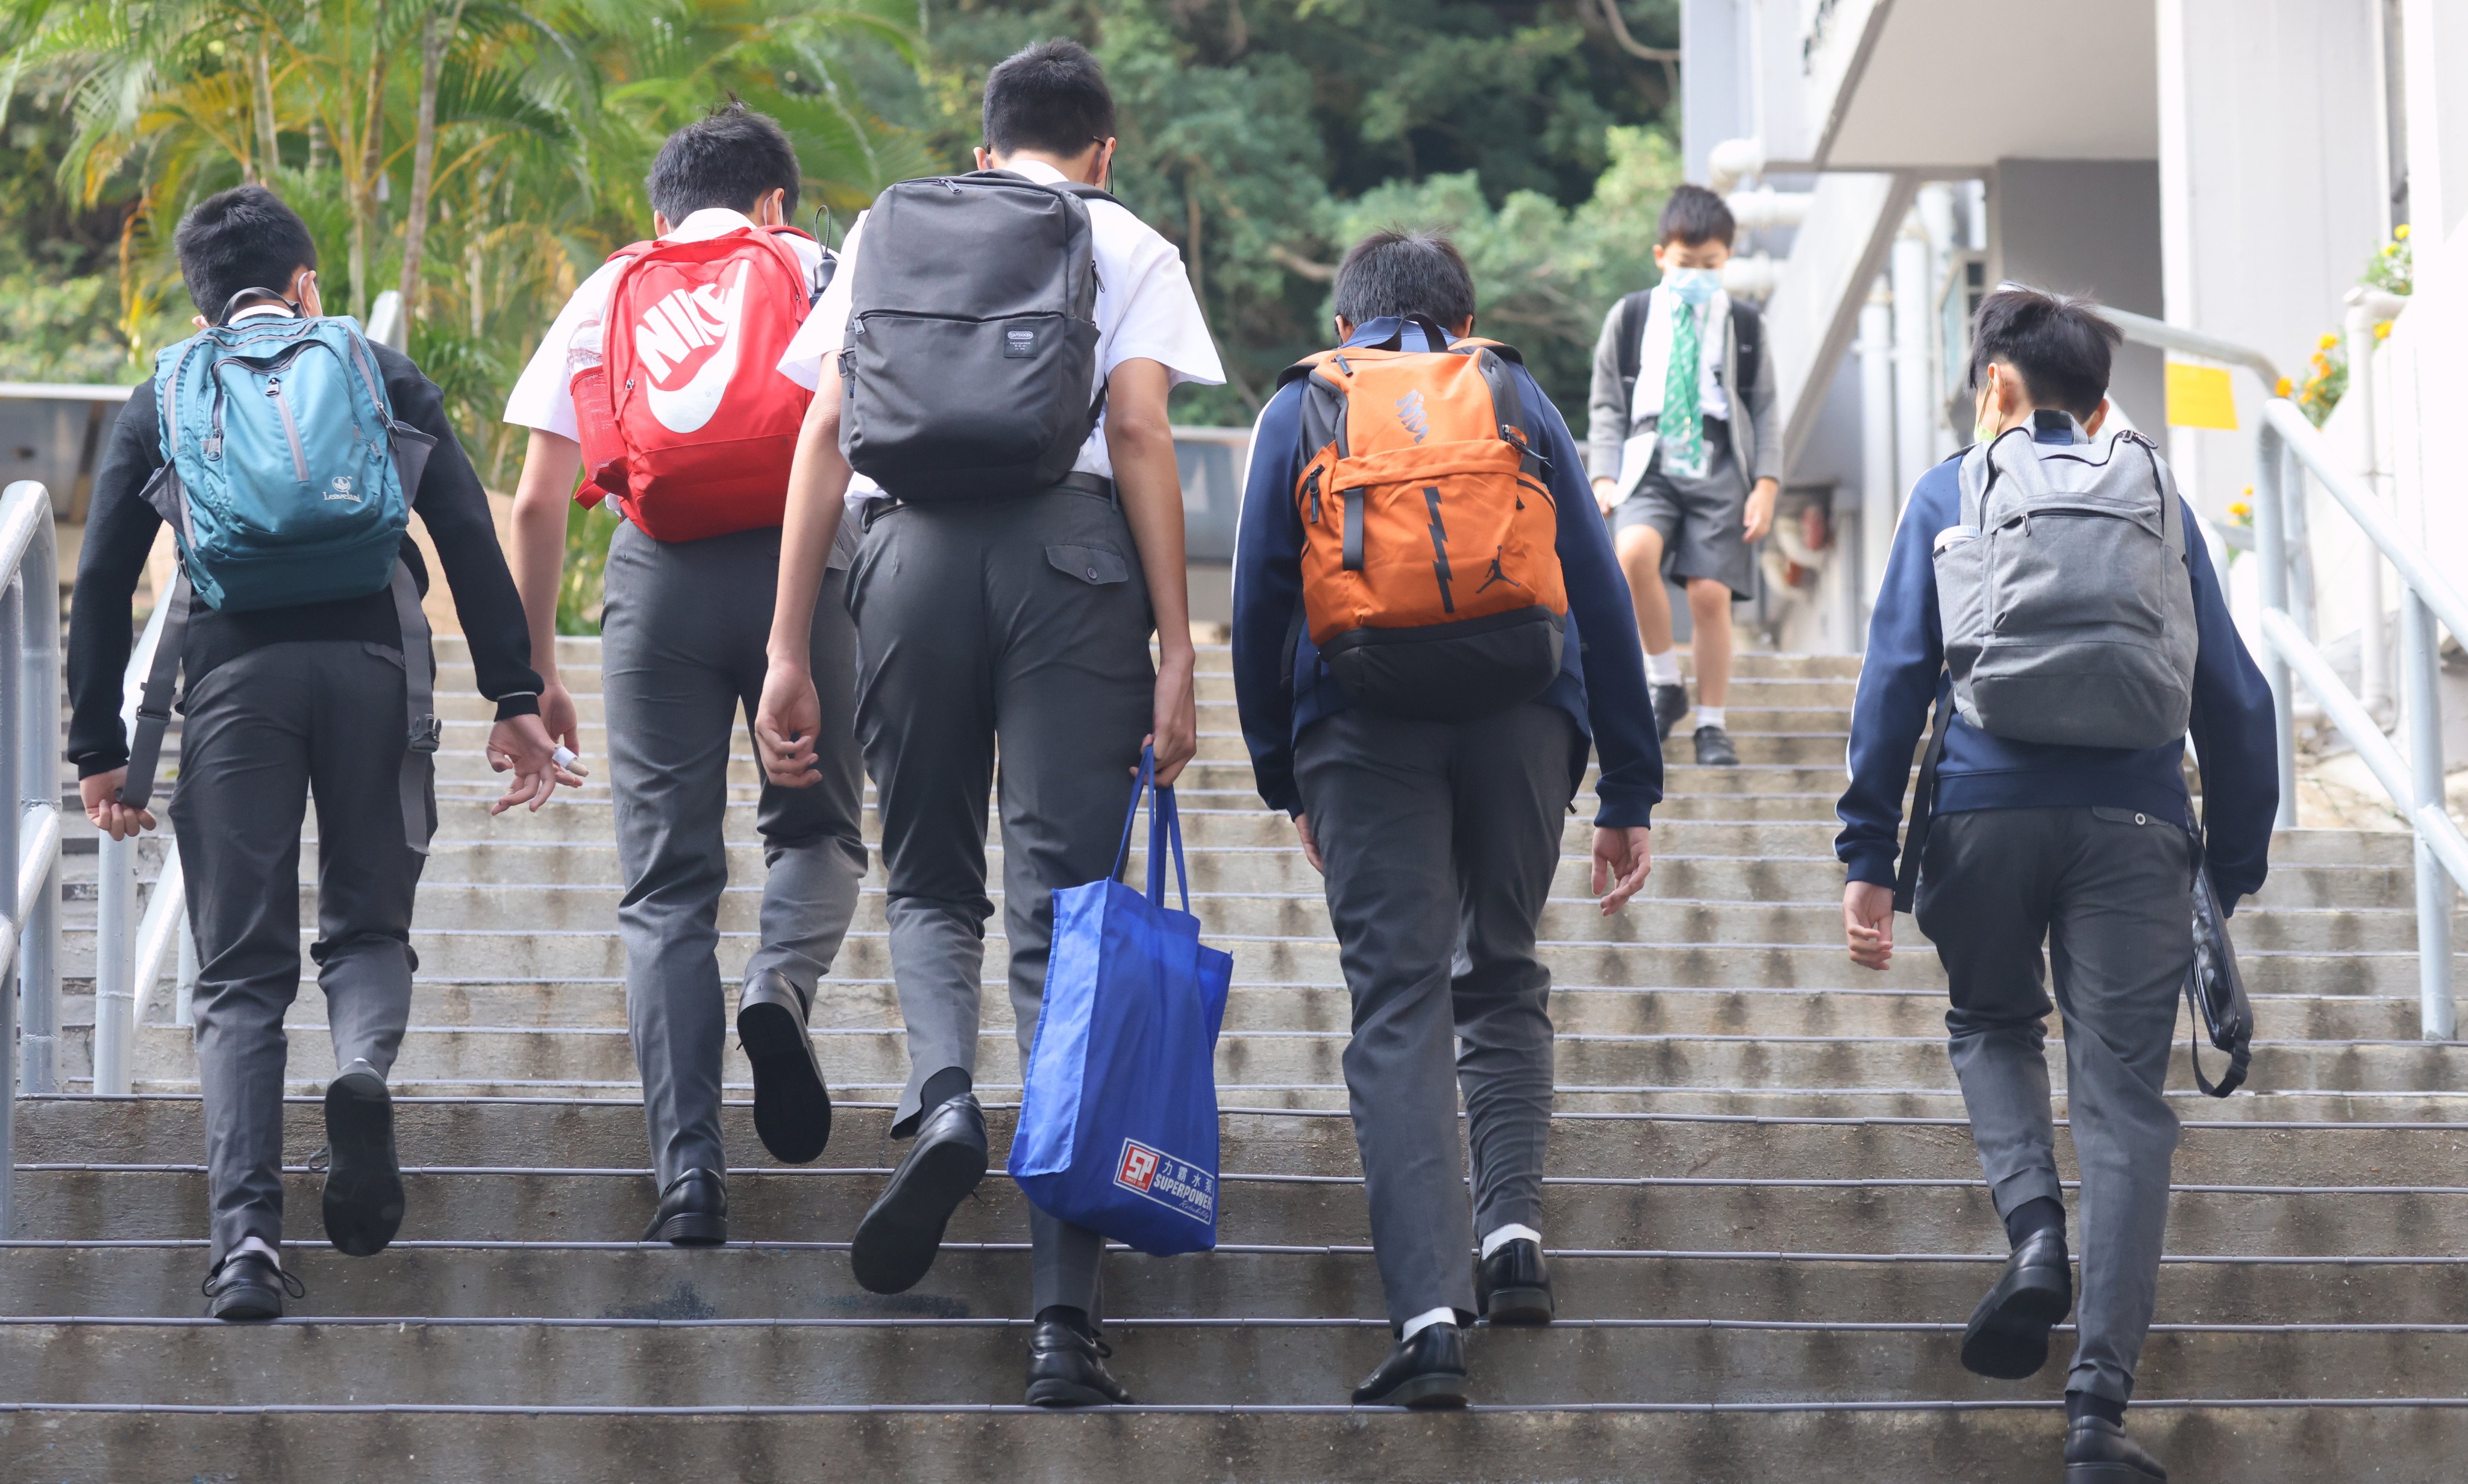 Hong Kong’s exam-driven education system means young people who go straight into the workforce from school face an uphill struggle. Photo: Dickson Lee